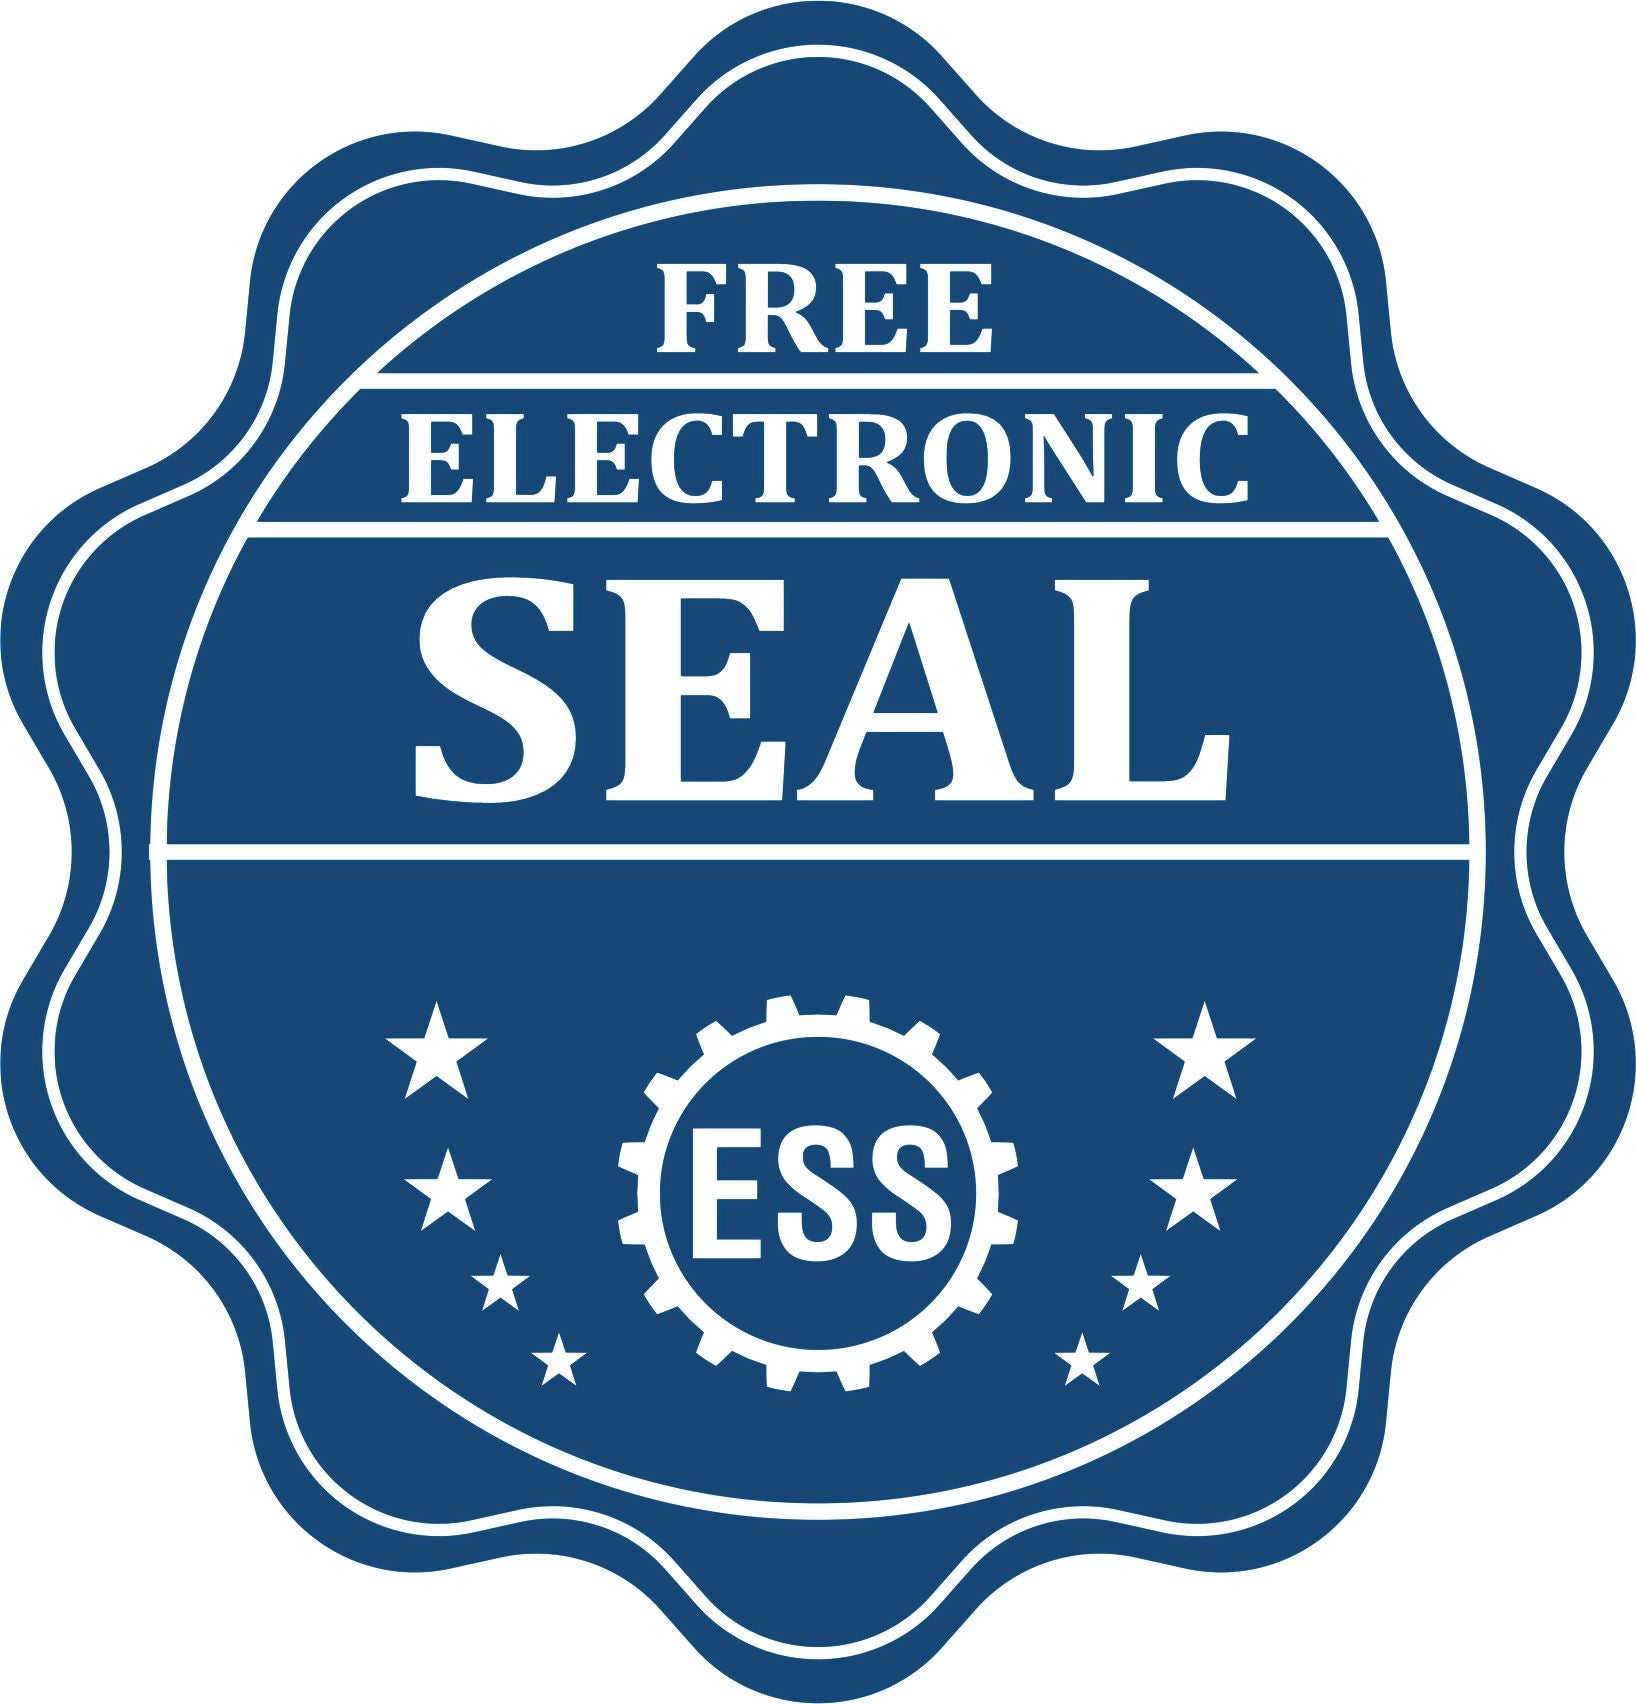 A badge showing a free electronic seal for the Hybrid Guam Landscape Architect Seal with stars and the ESS gear on the emblem.